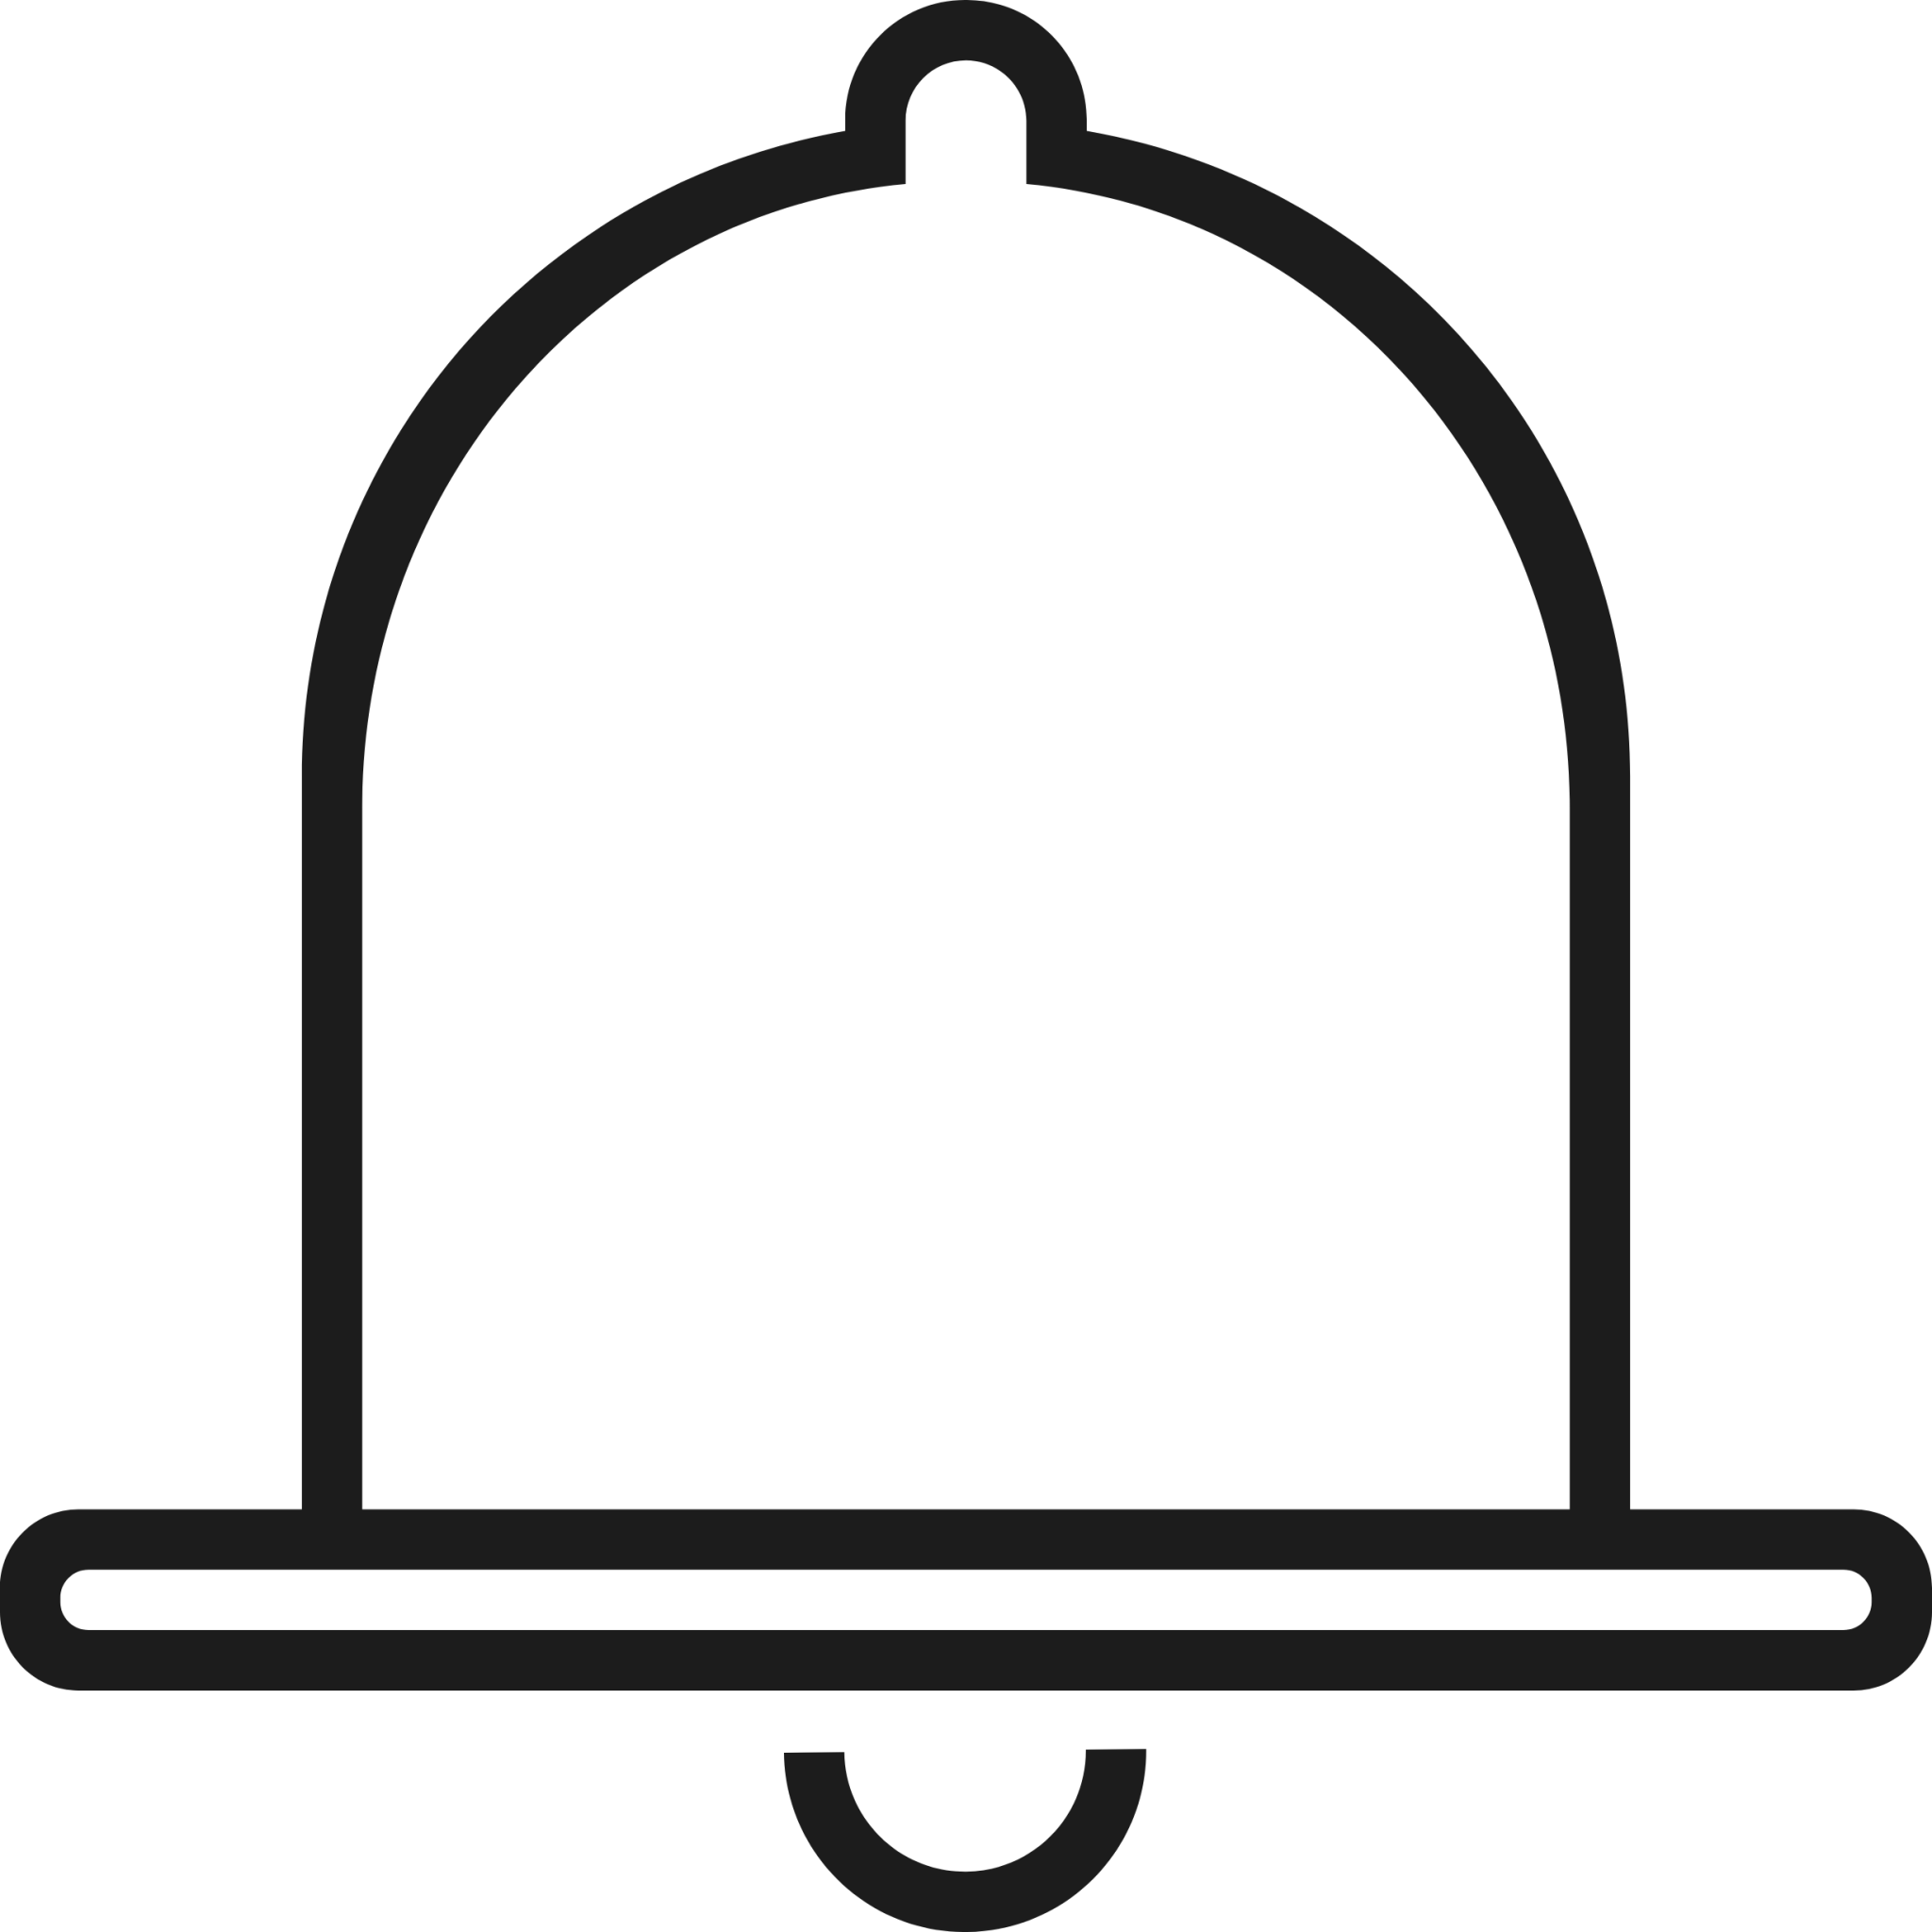 notification bell icon